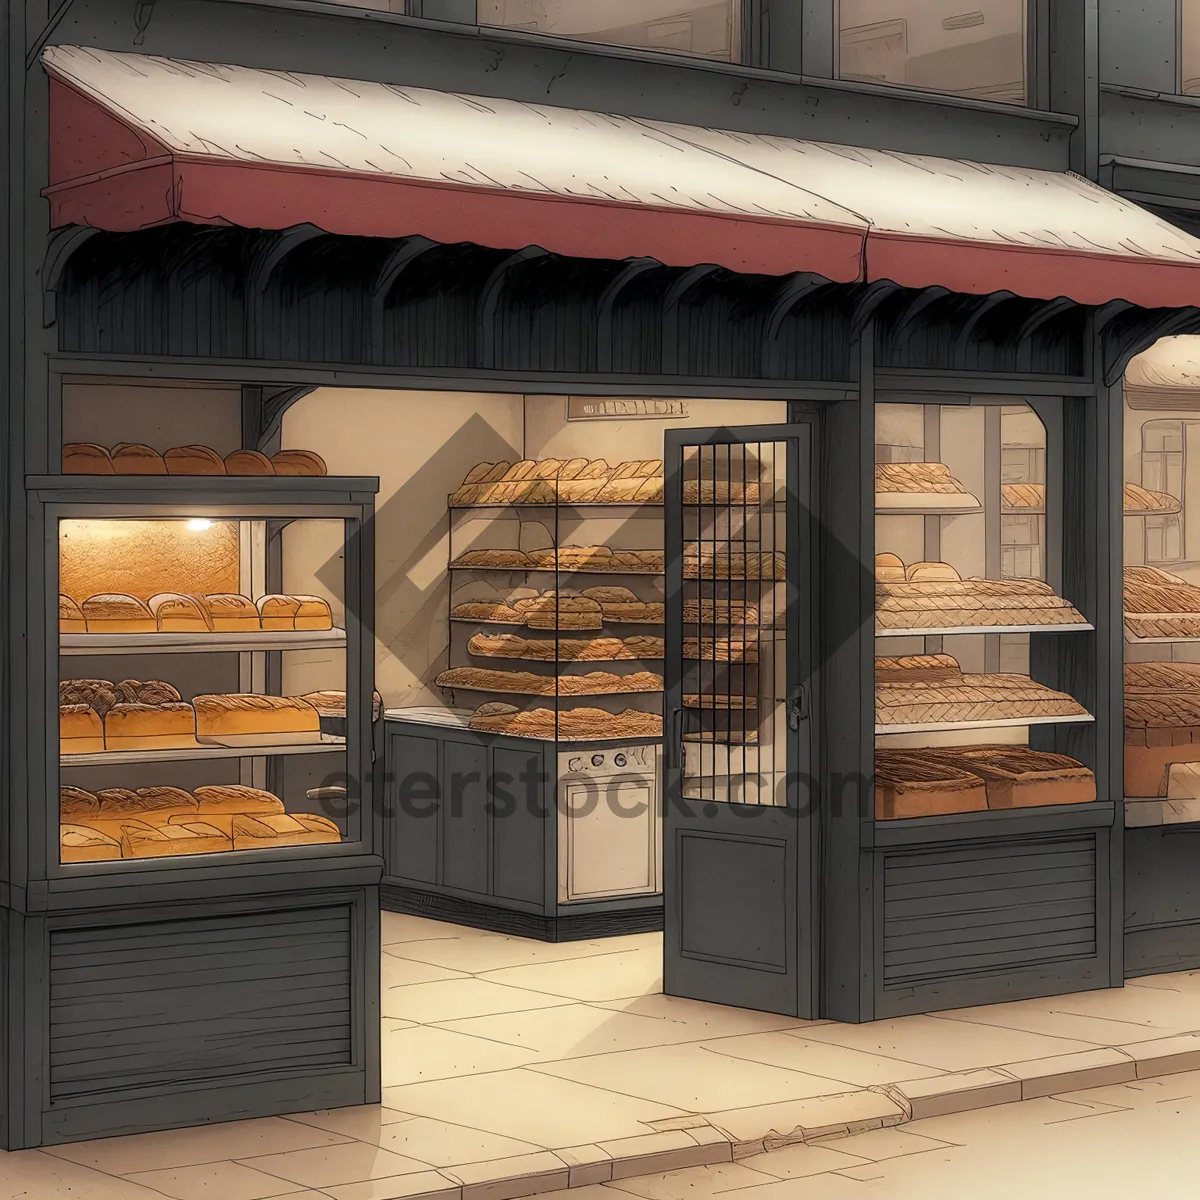 Picture of Bakery Shop Entrance